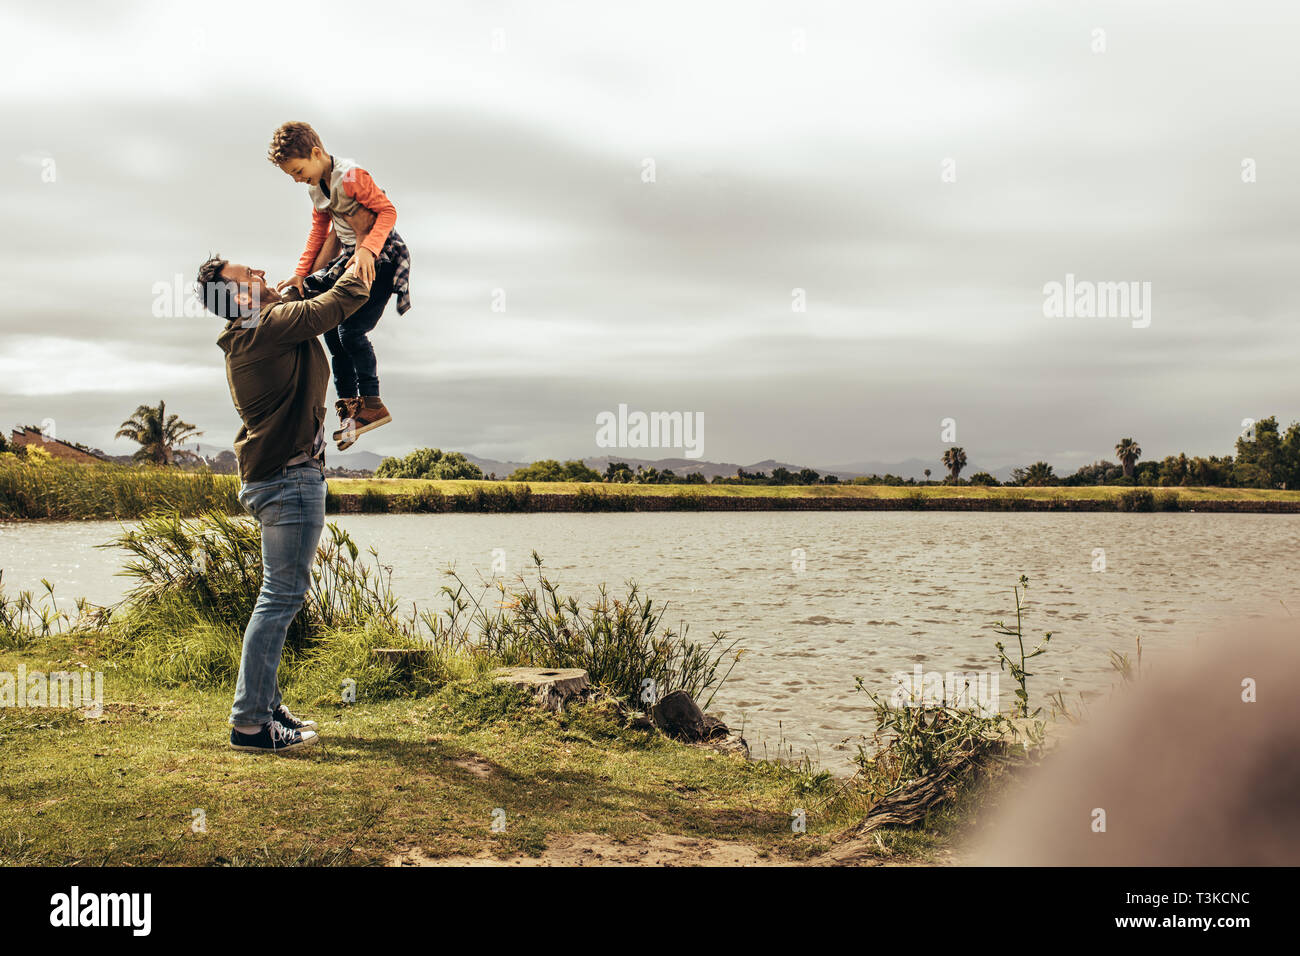 Father and son having fun spending time together outdoors. Man lifting his son high playing with him standing near a lake. Stock Photo